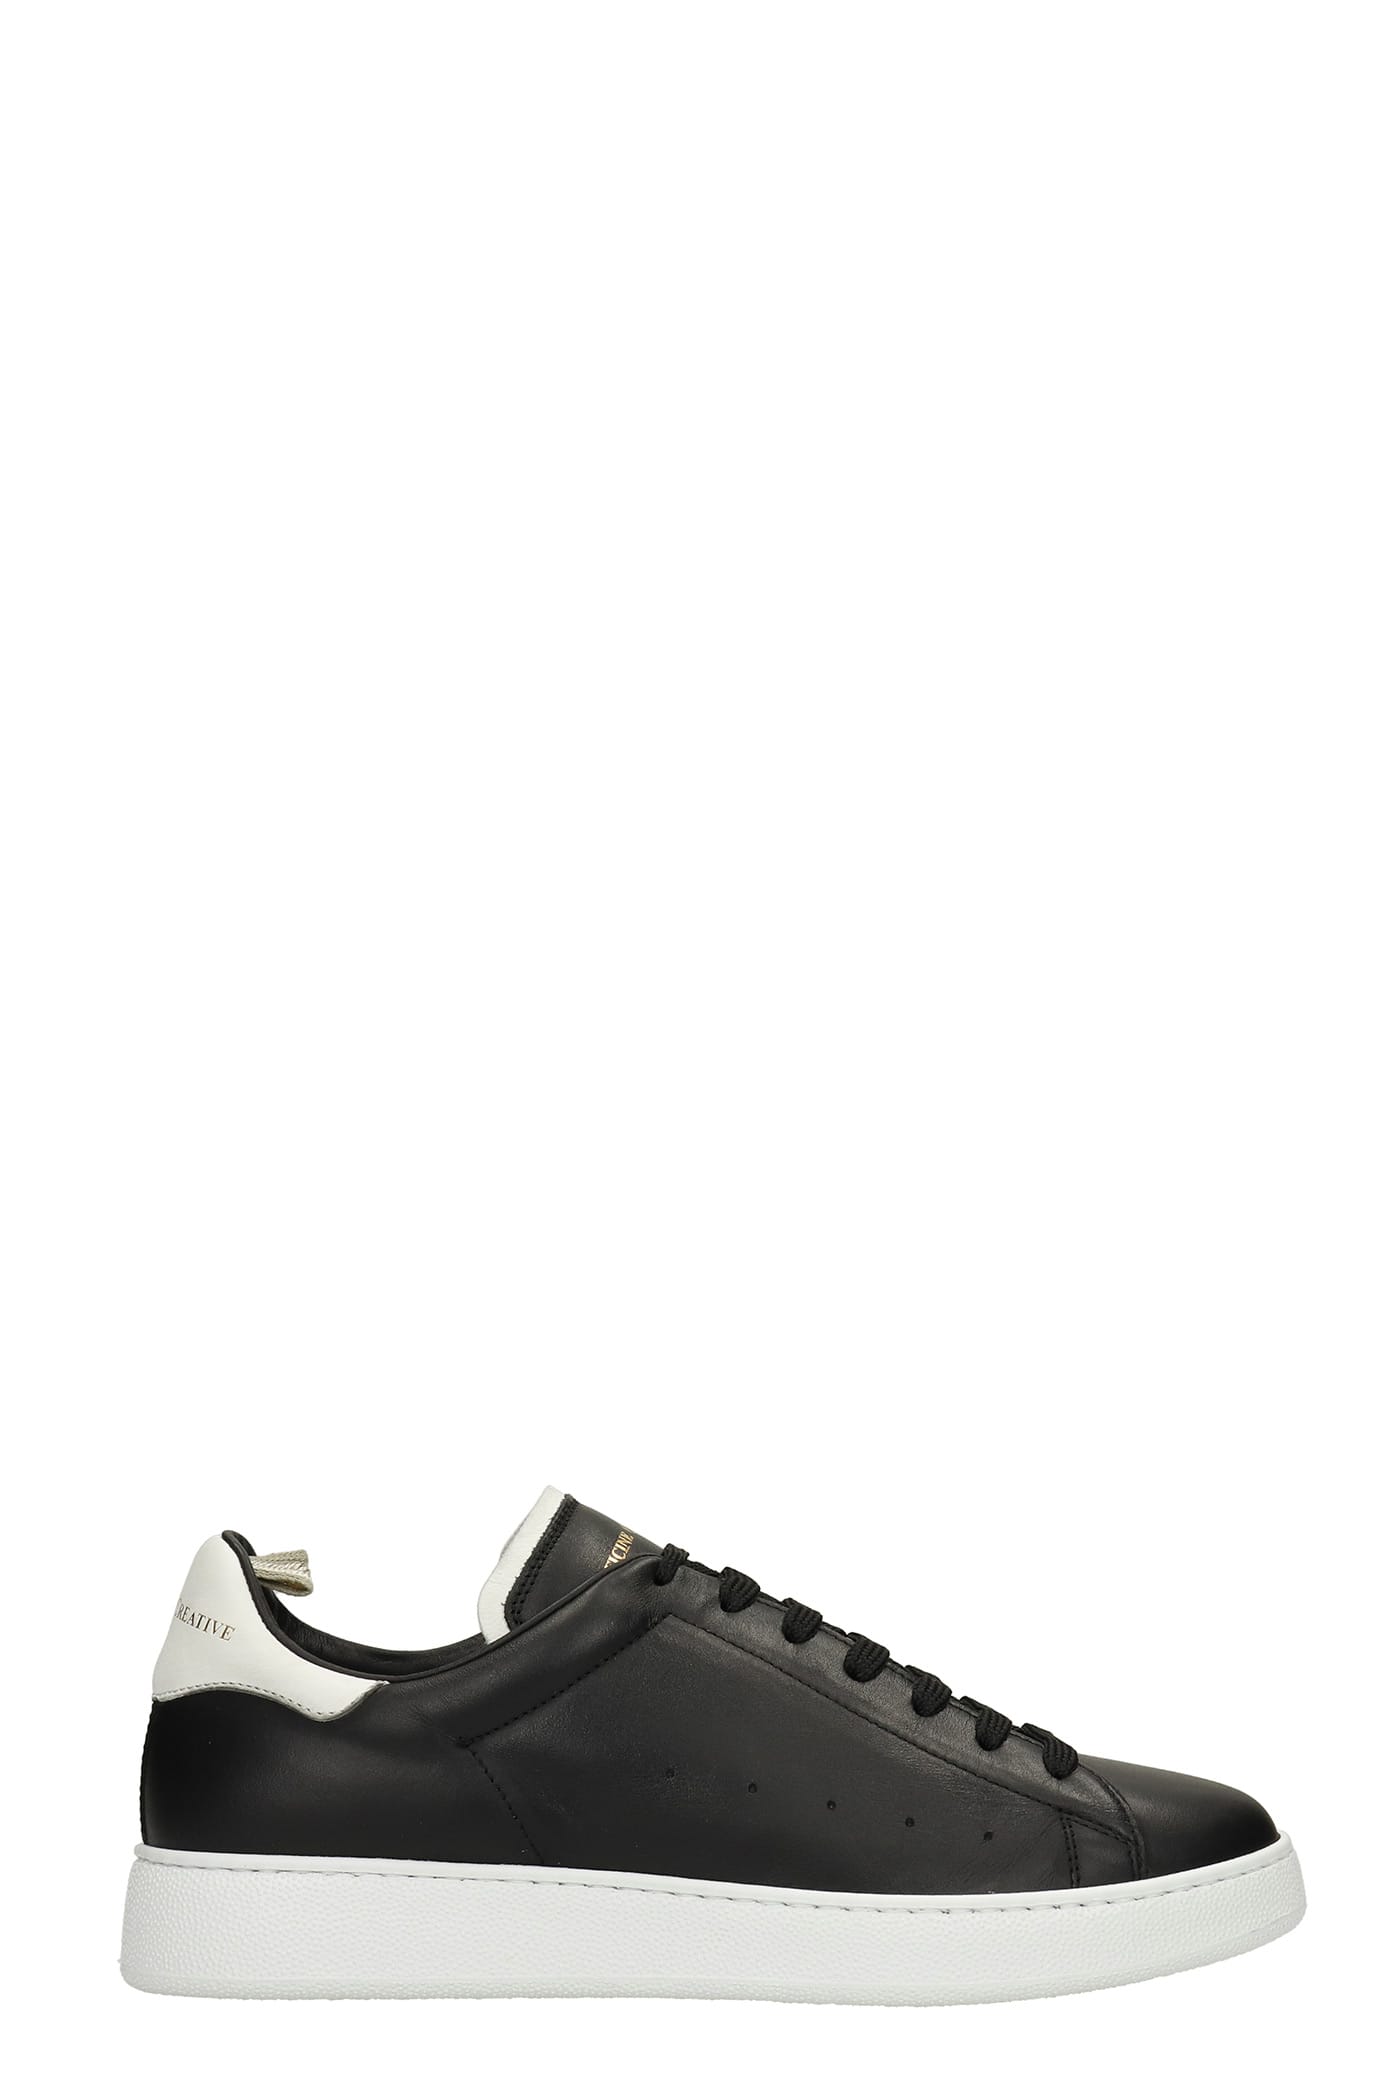 Officine Creative Mower 005 Sneakers In Black Leather